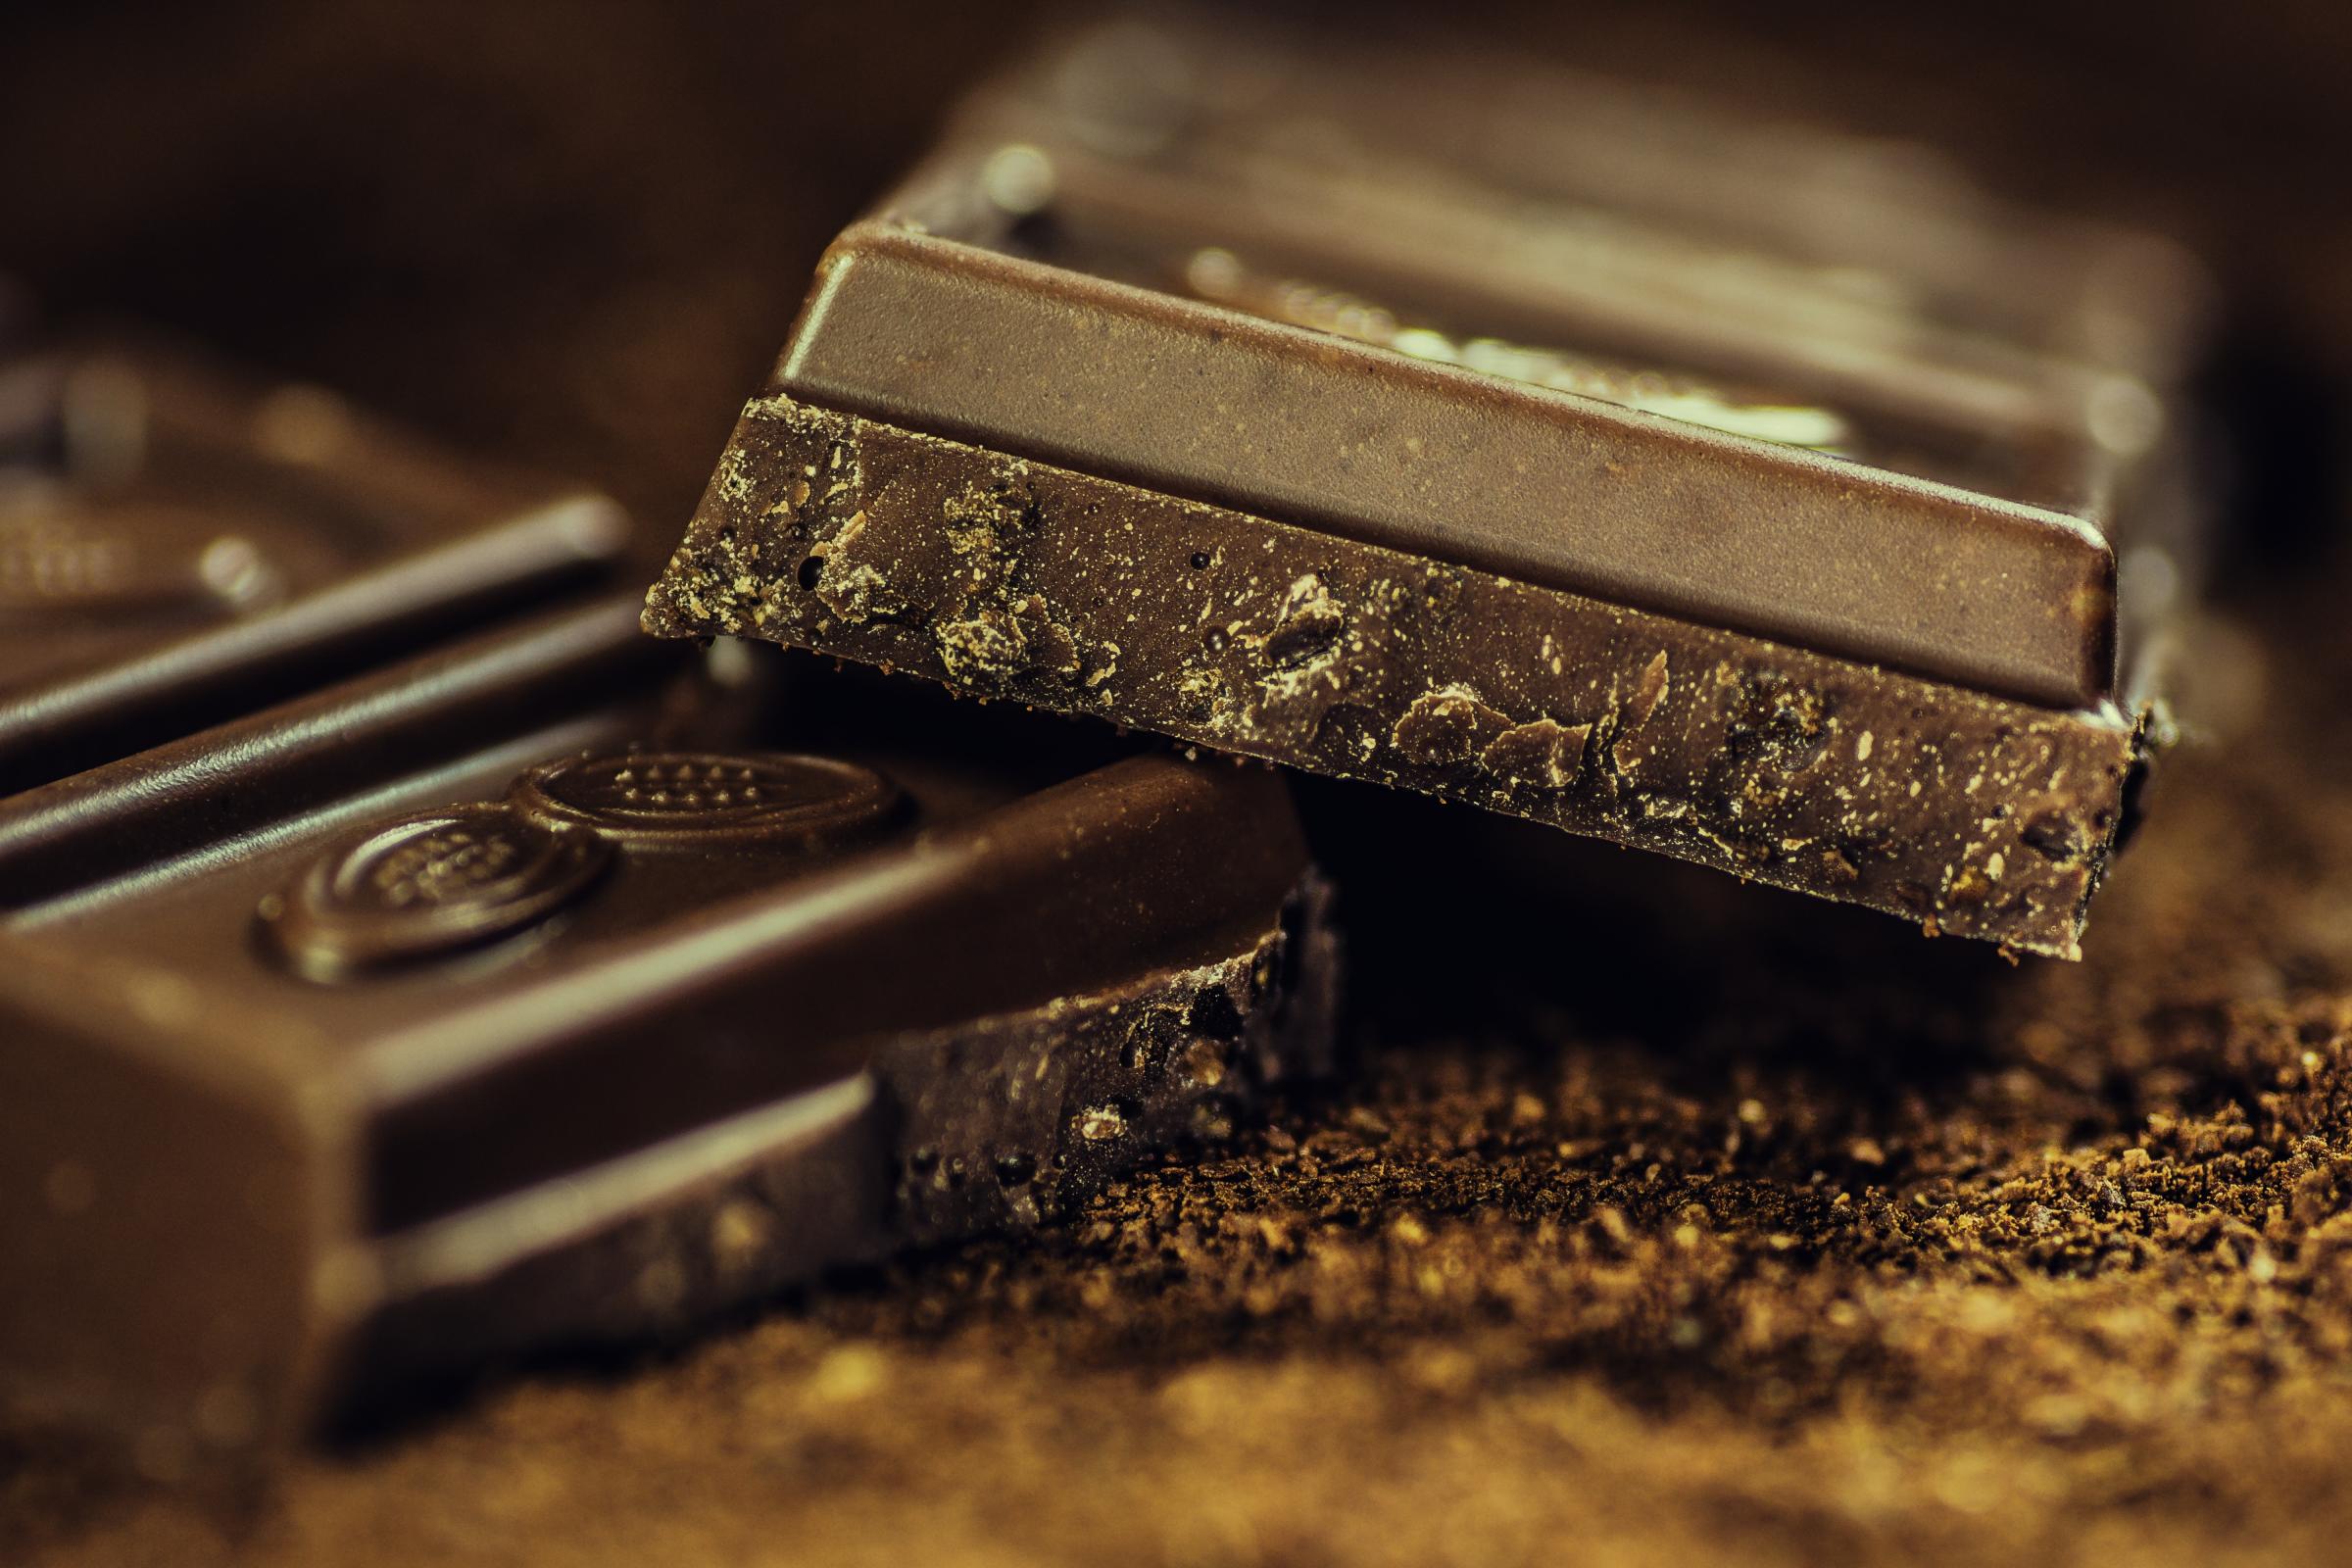 Fancy chocolate for breakfast, lunch and dinner?